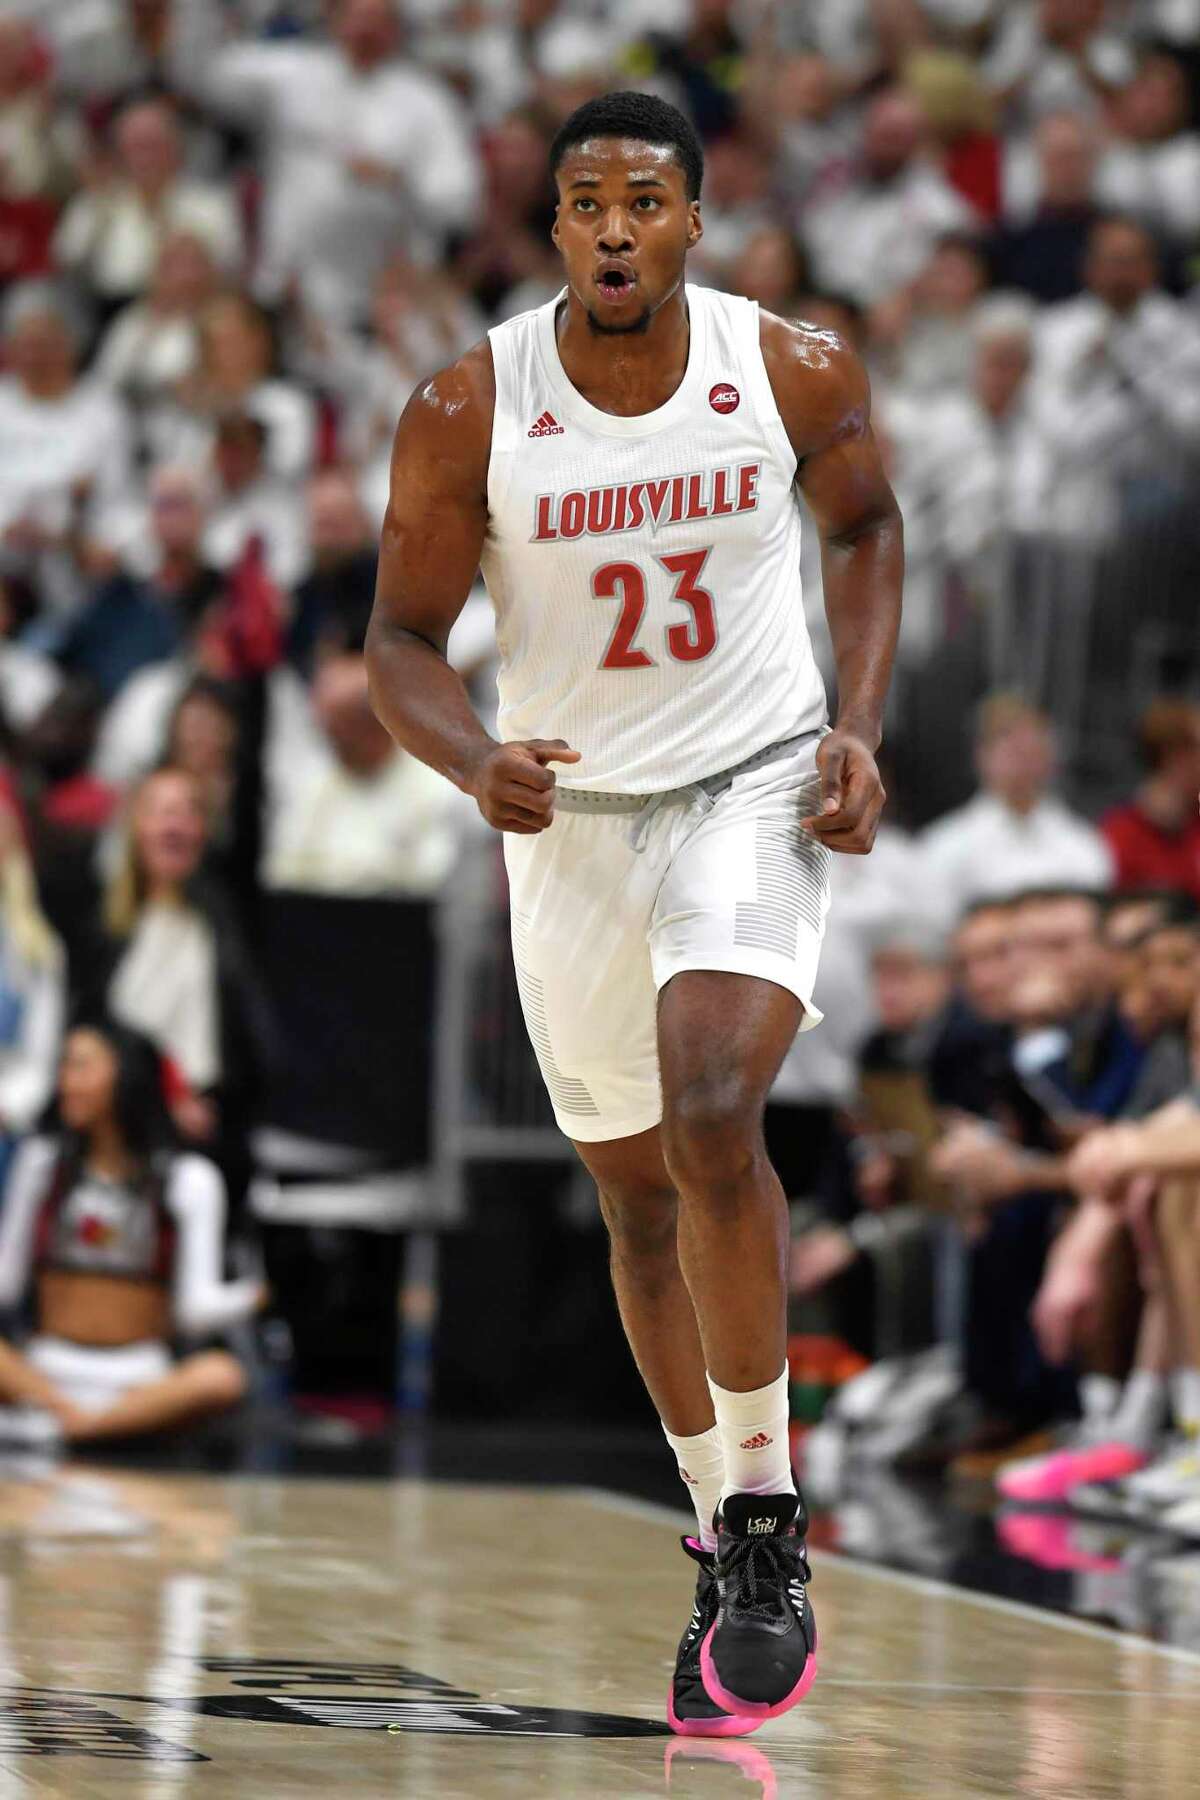 Norwalk product and former UConn big man Steven Enoch is the second-leading scorer for No. 1 Louisville.